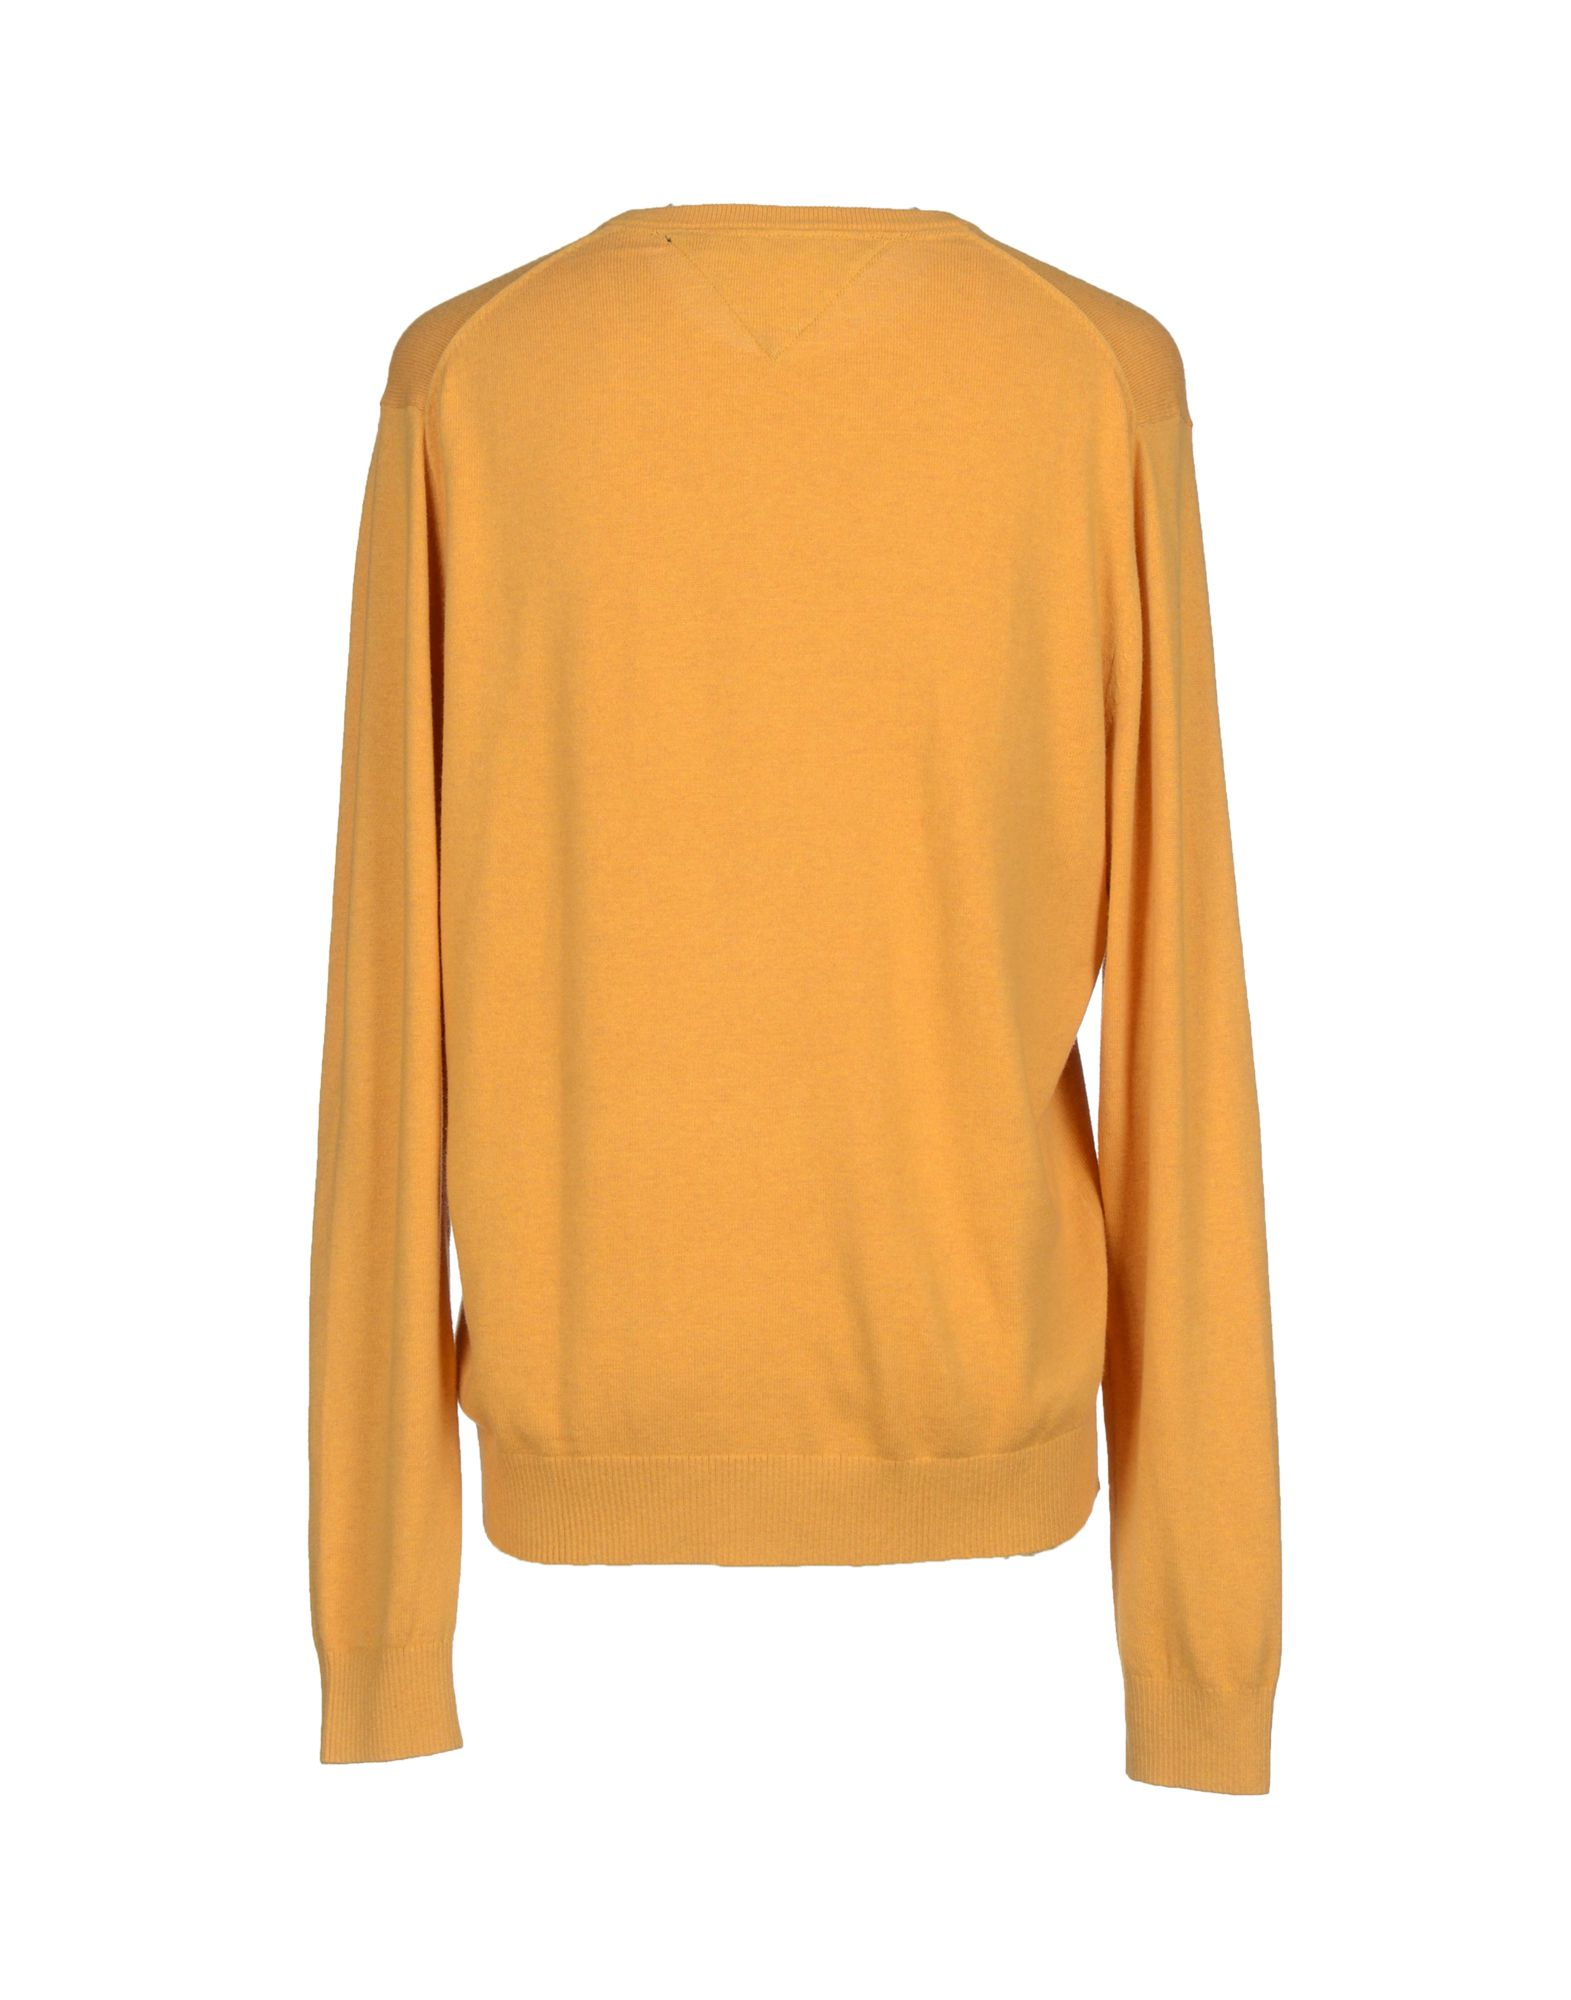 Lyst - Tommy Hilfiger Jumper in Yellow for Men